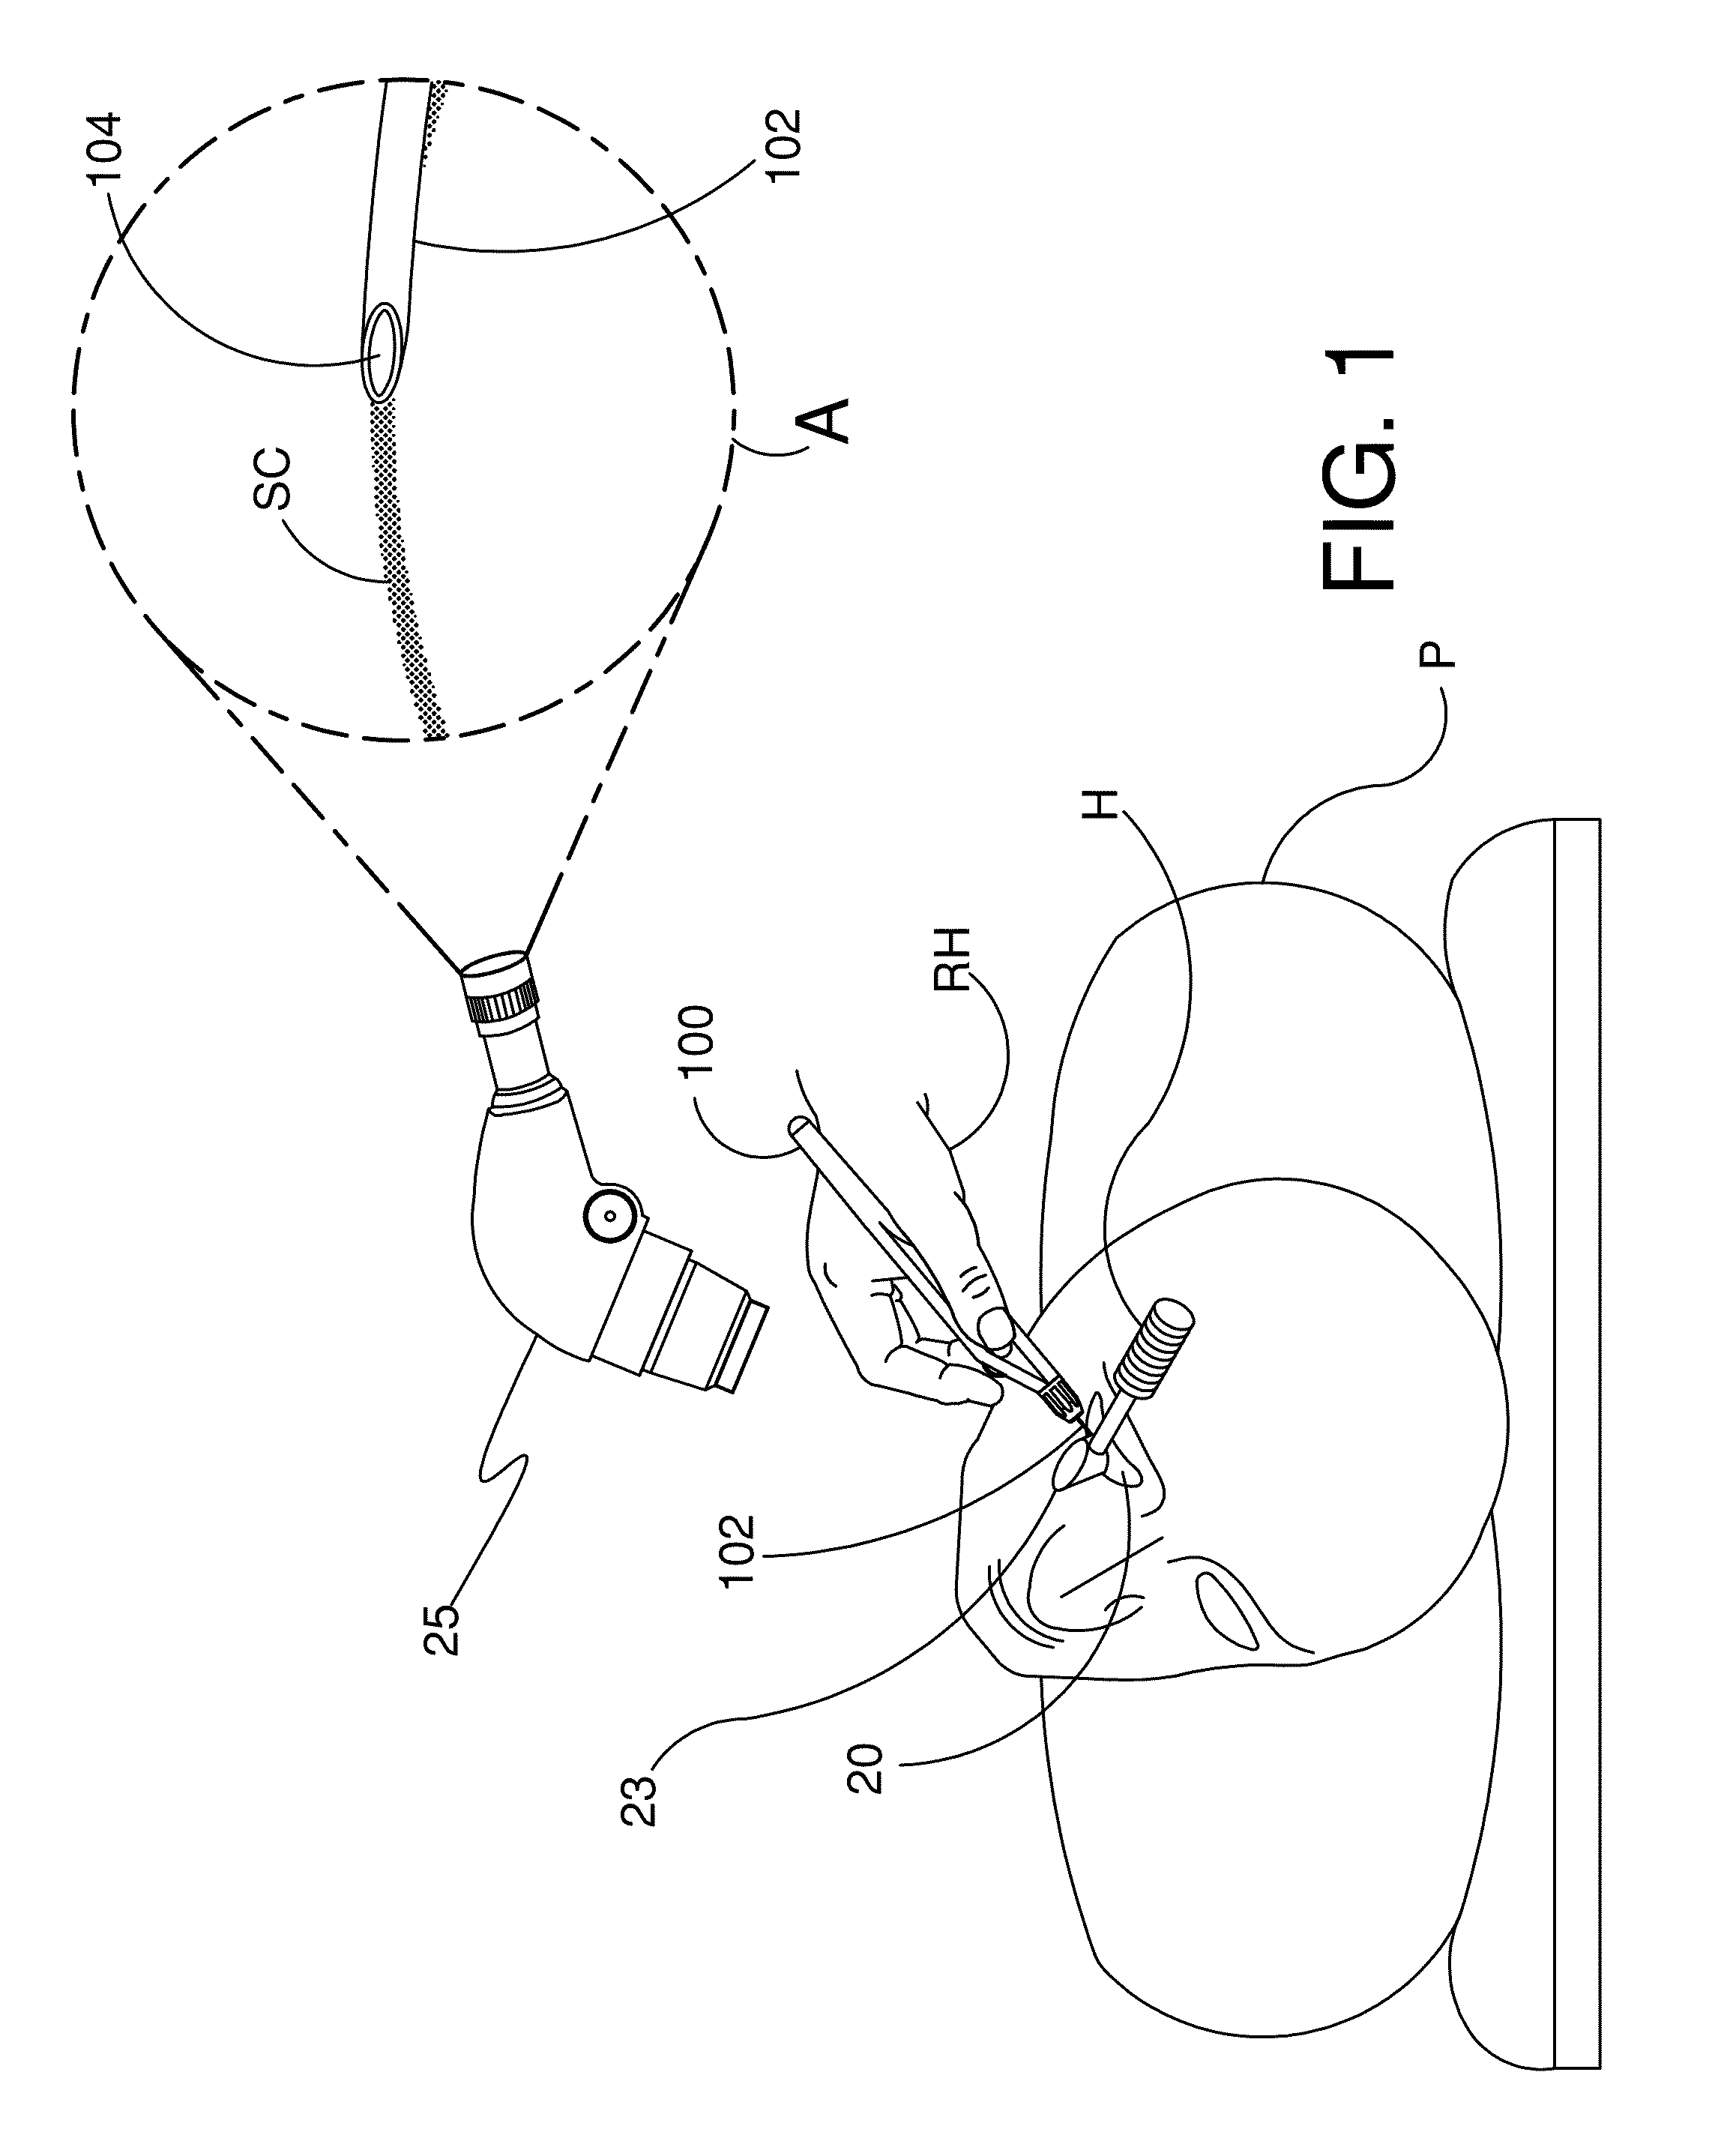 Ocular Implants and Methods for Delivering Ocular Implants Into the Eye